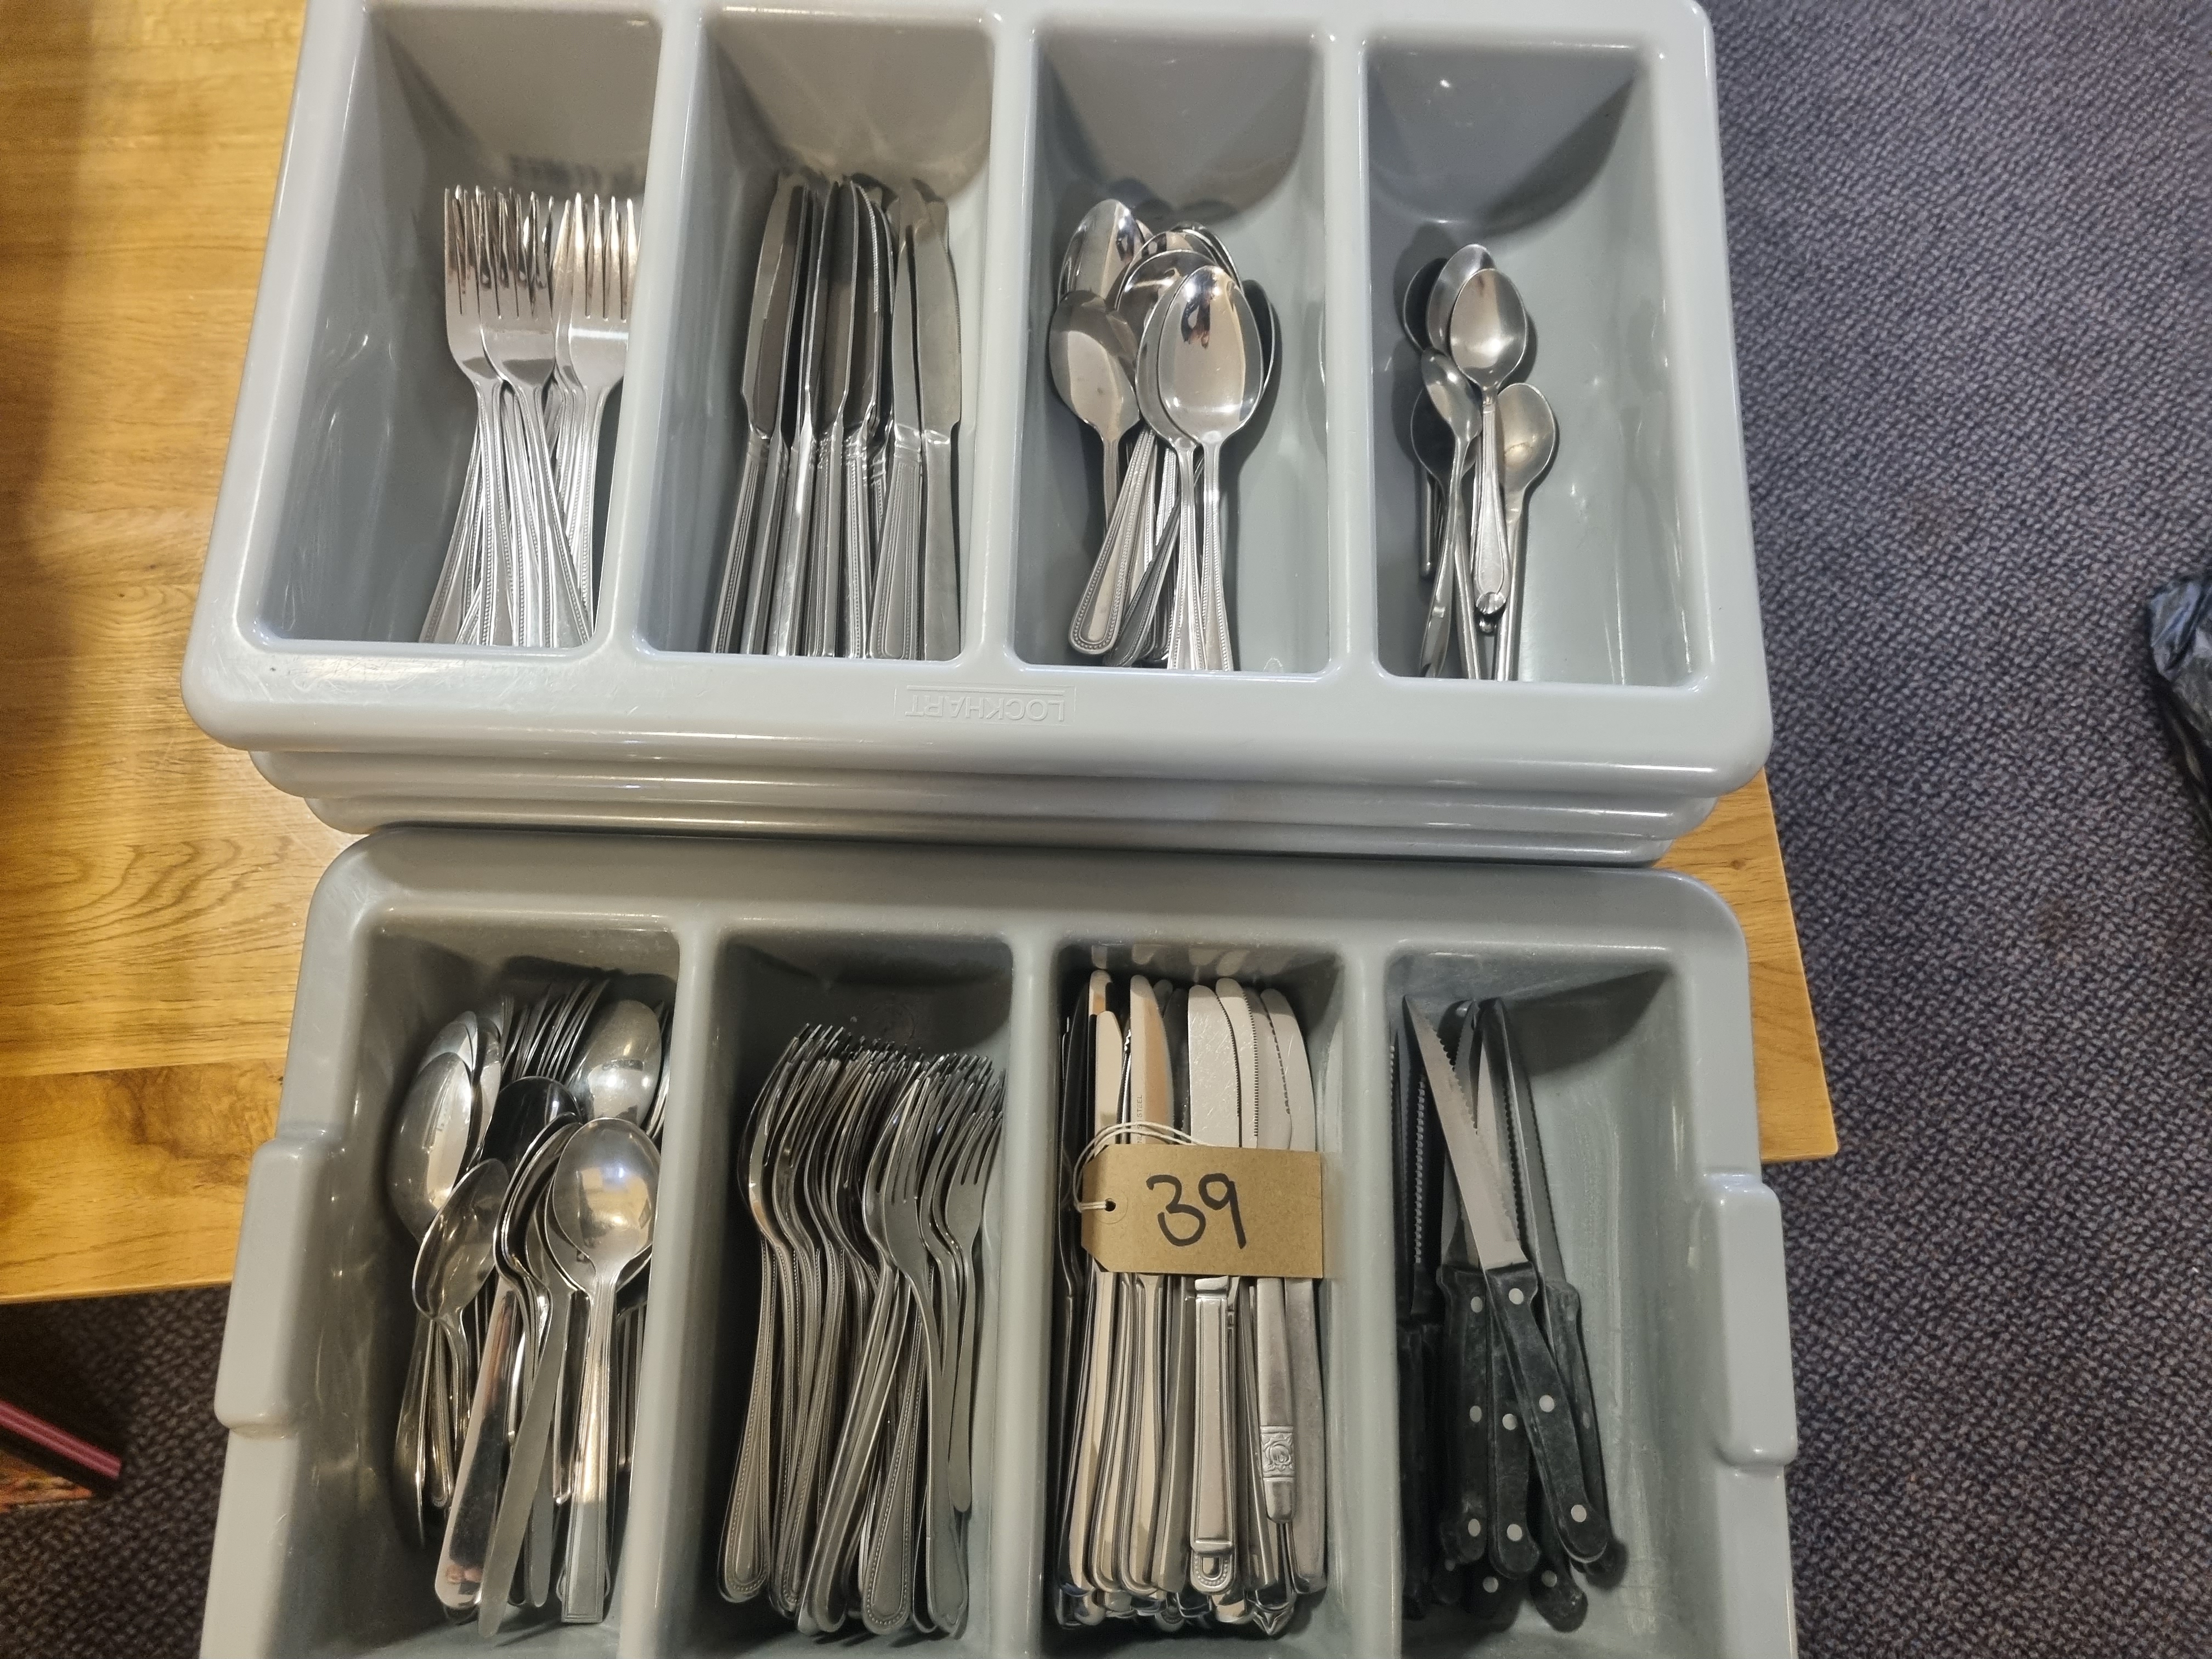 A Large Quantity Of Cutlery Comprising Of Knives Forks Spoons and Steak Knives - Complete With 4